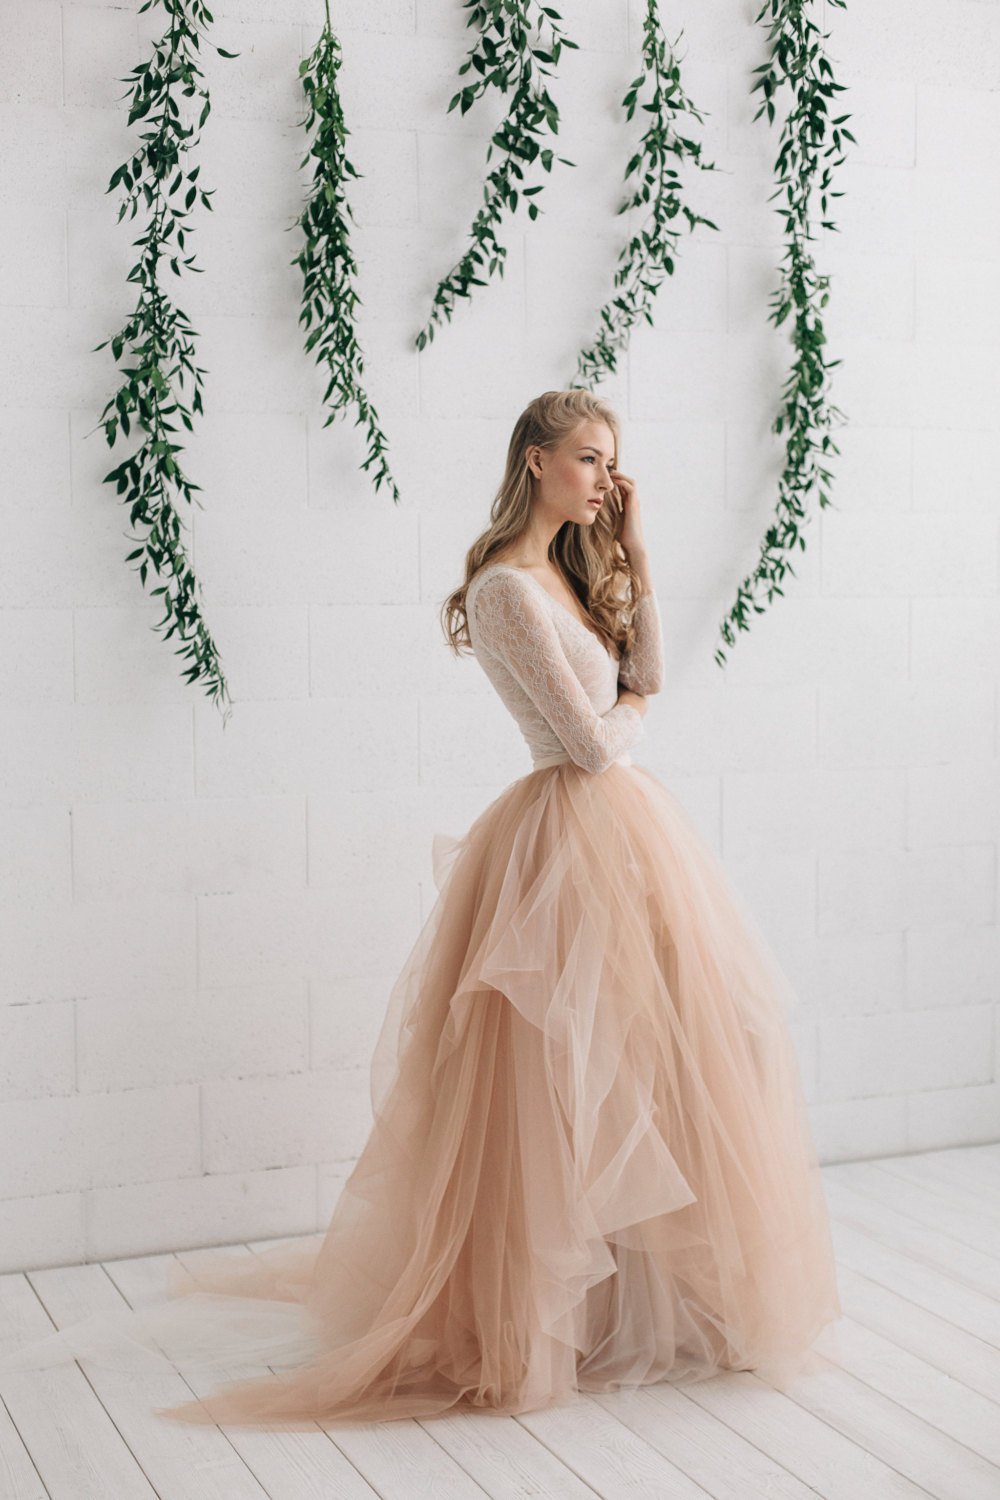 These Magical Tulle Wedding Gowns Will Take Your Breath Away